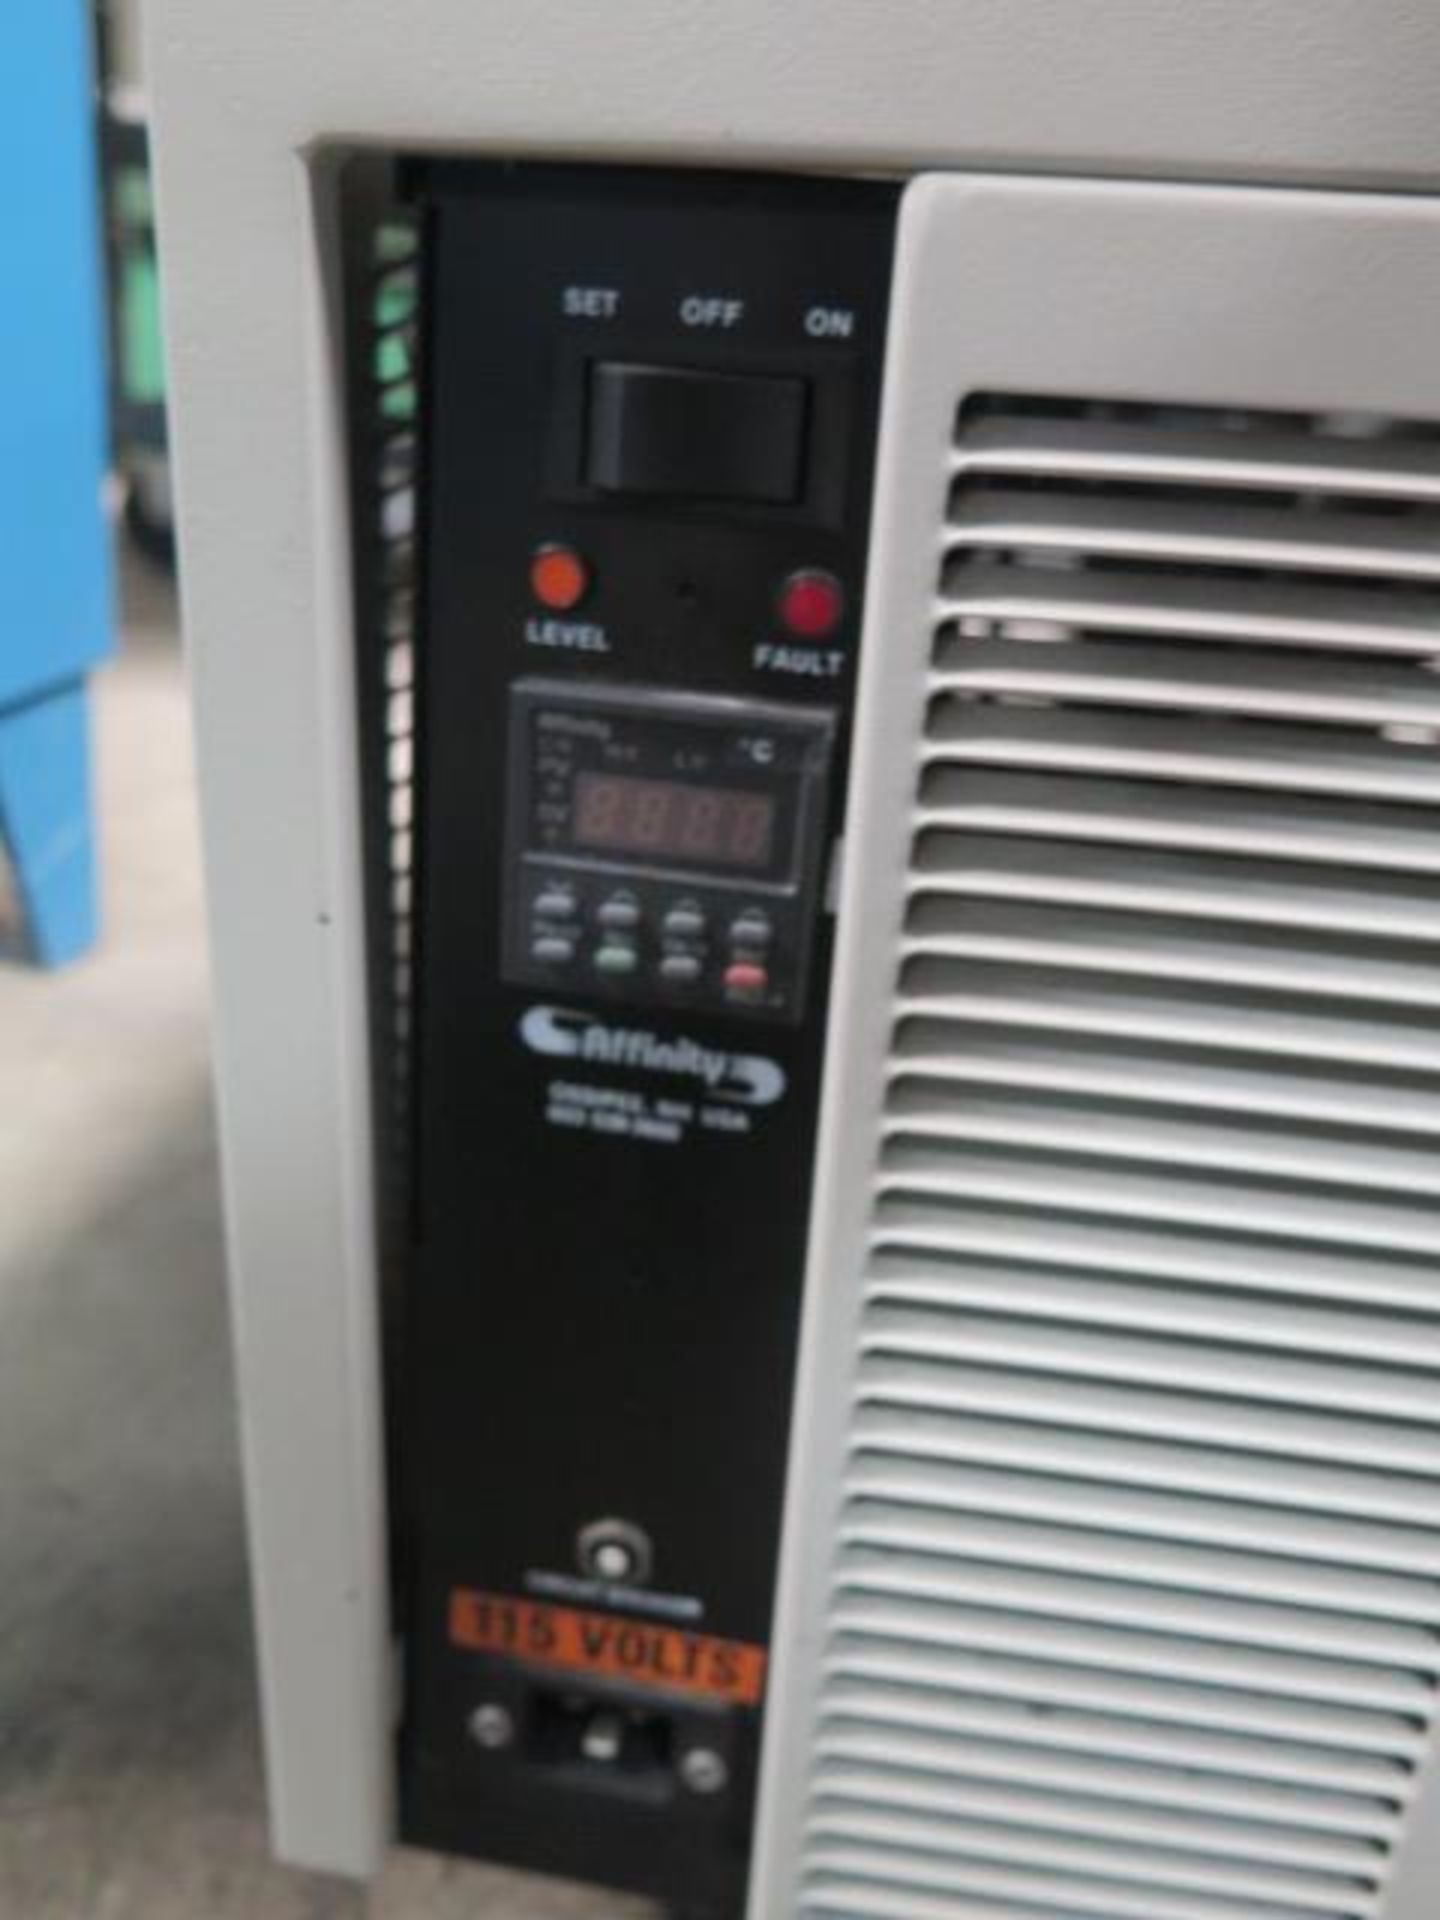 Affinity EWA-04BA-CD19CBM0 Water Cooled Heat Exchanger (SOLD AS-IS - NO WARRANTY) - Image 6 of 7